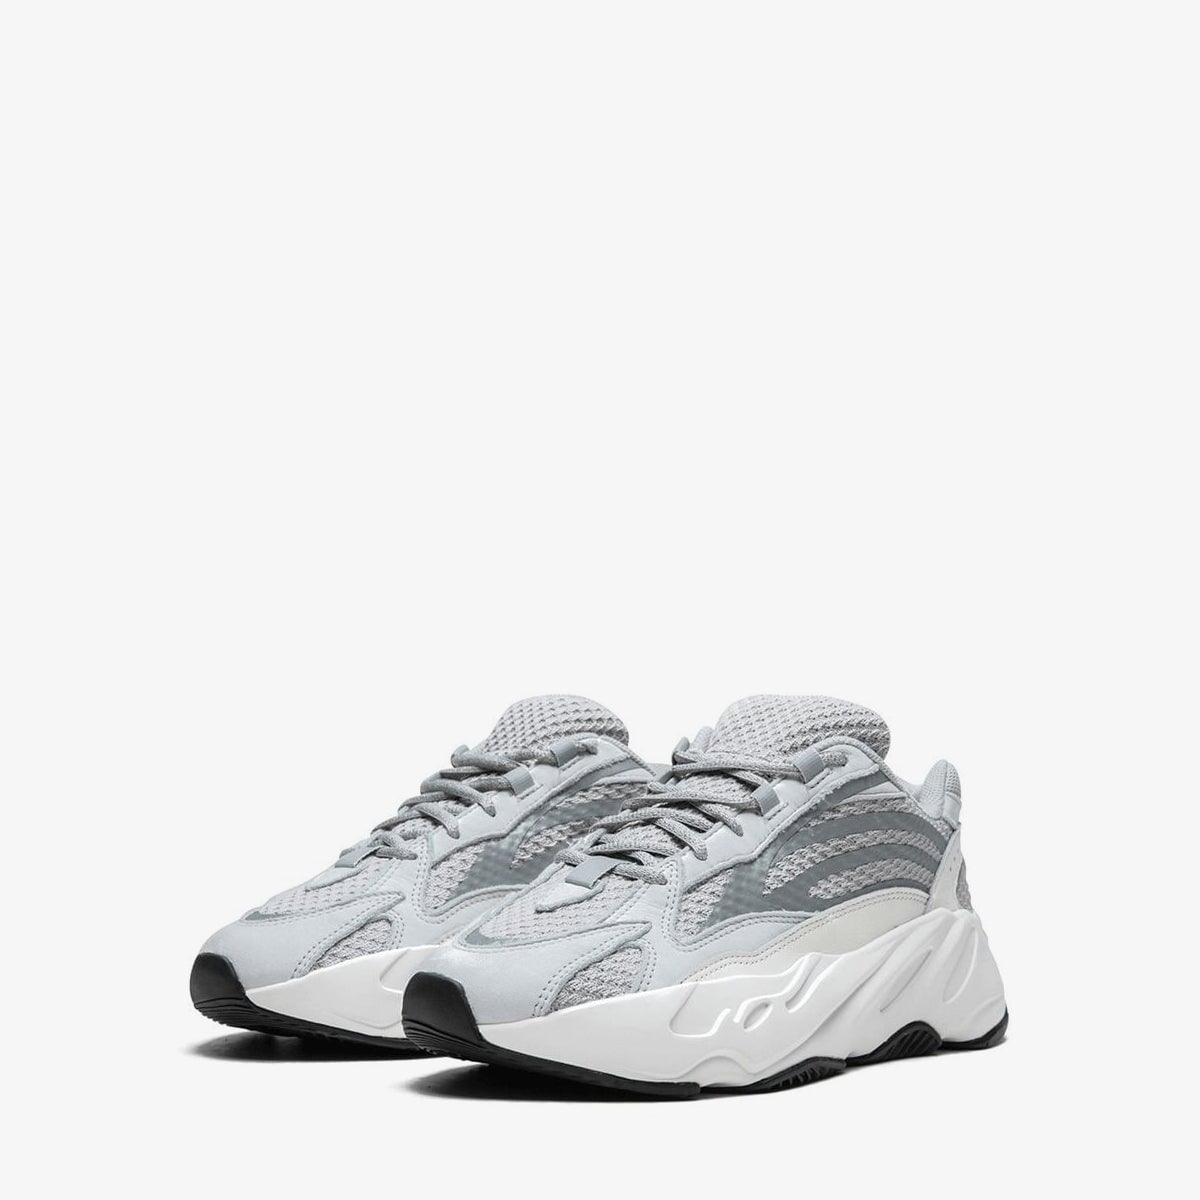 Yeezy Boost 700 "Static" Sneakers adidas